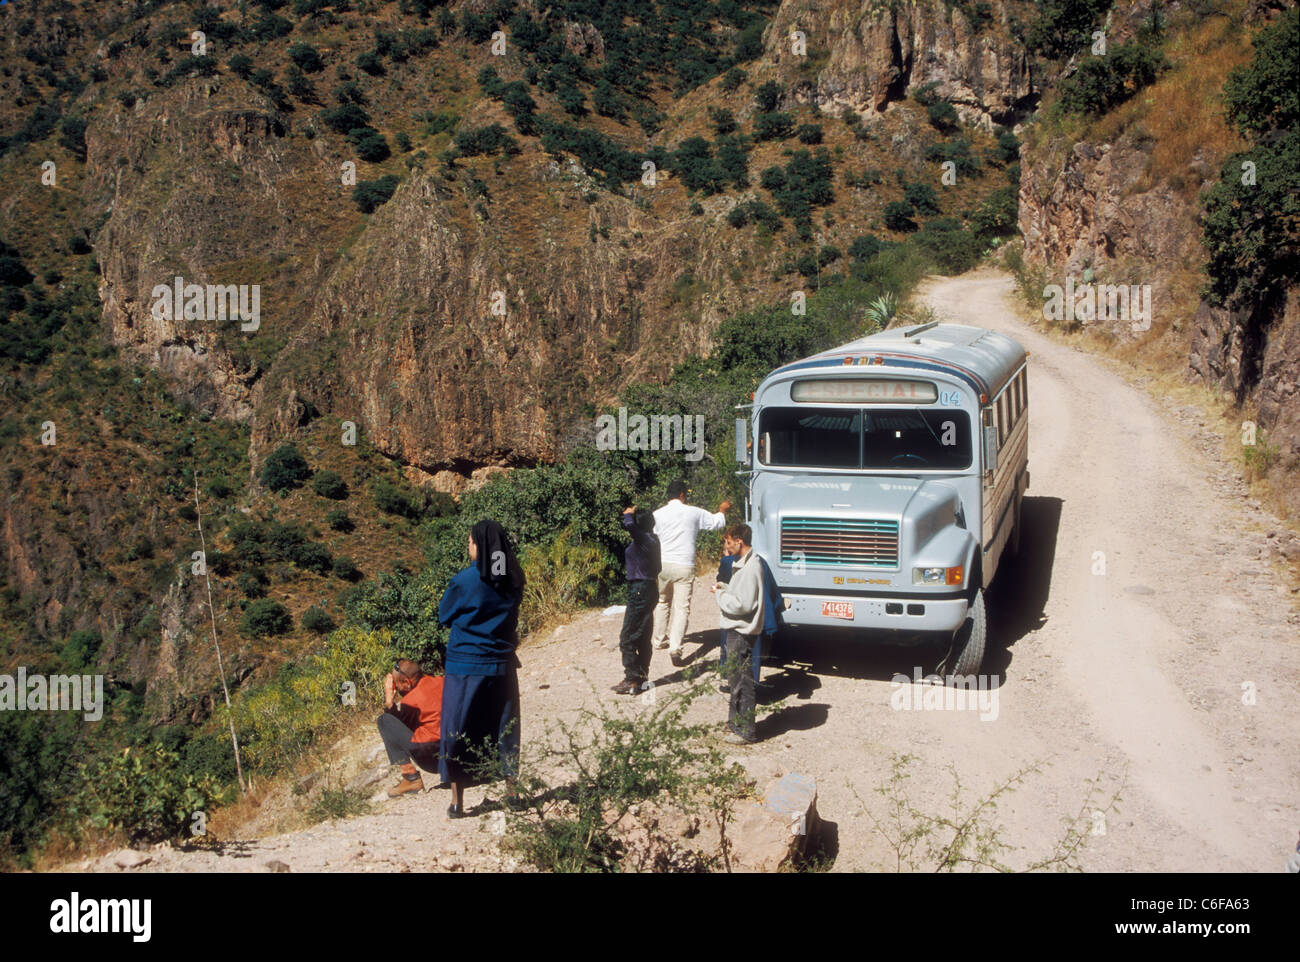 Passengers and driver break the perilous ride down into one of the canyons of the Sierra Madre mountains in northern Mexico Stock Photo